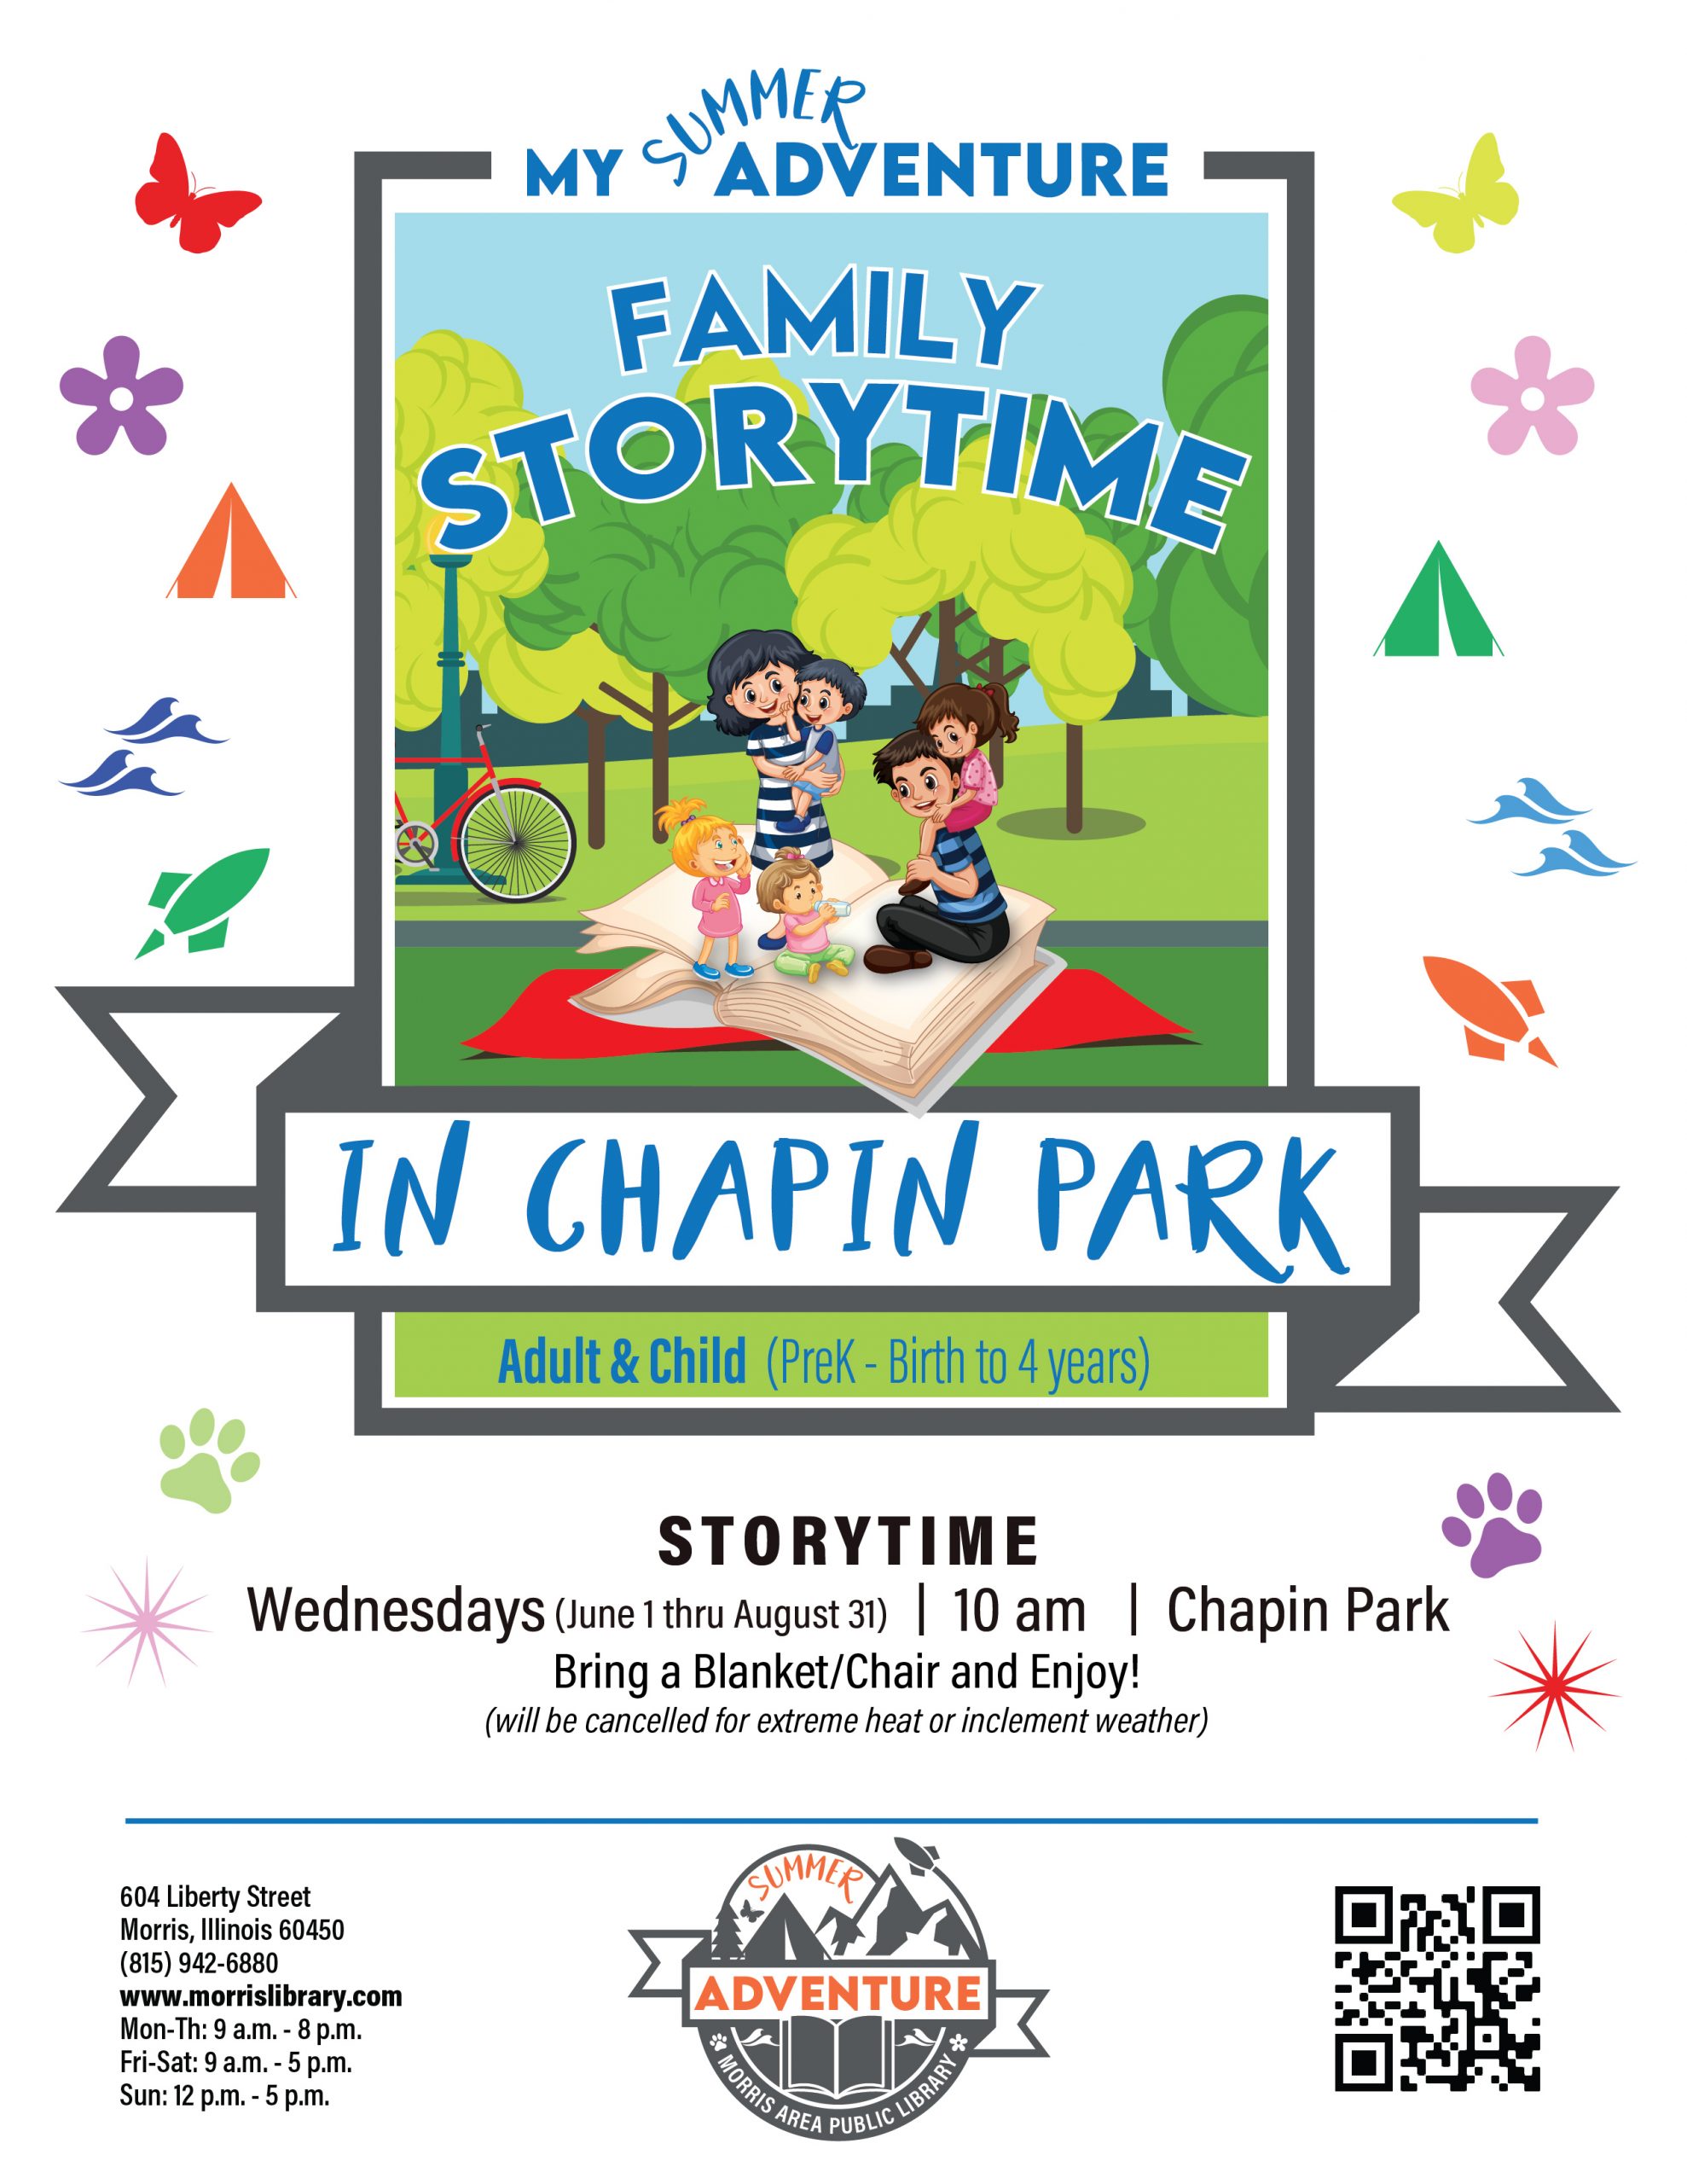 Family Storytime in Chapin Park